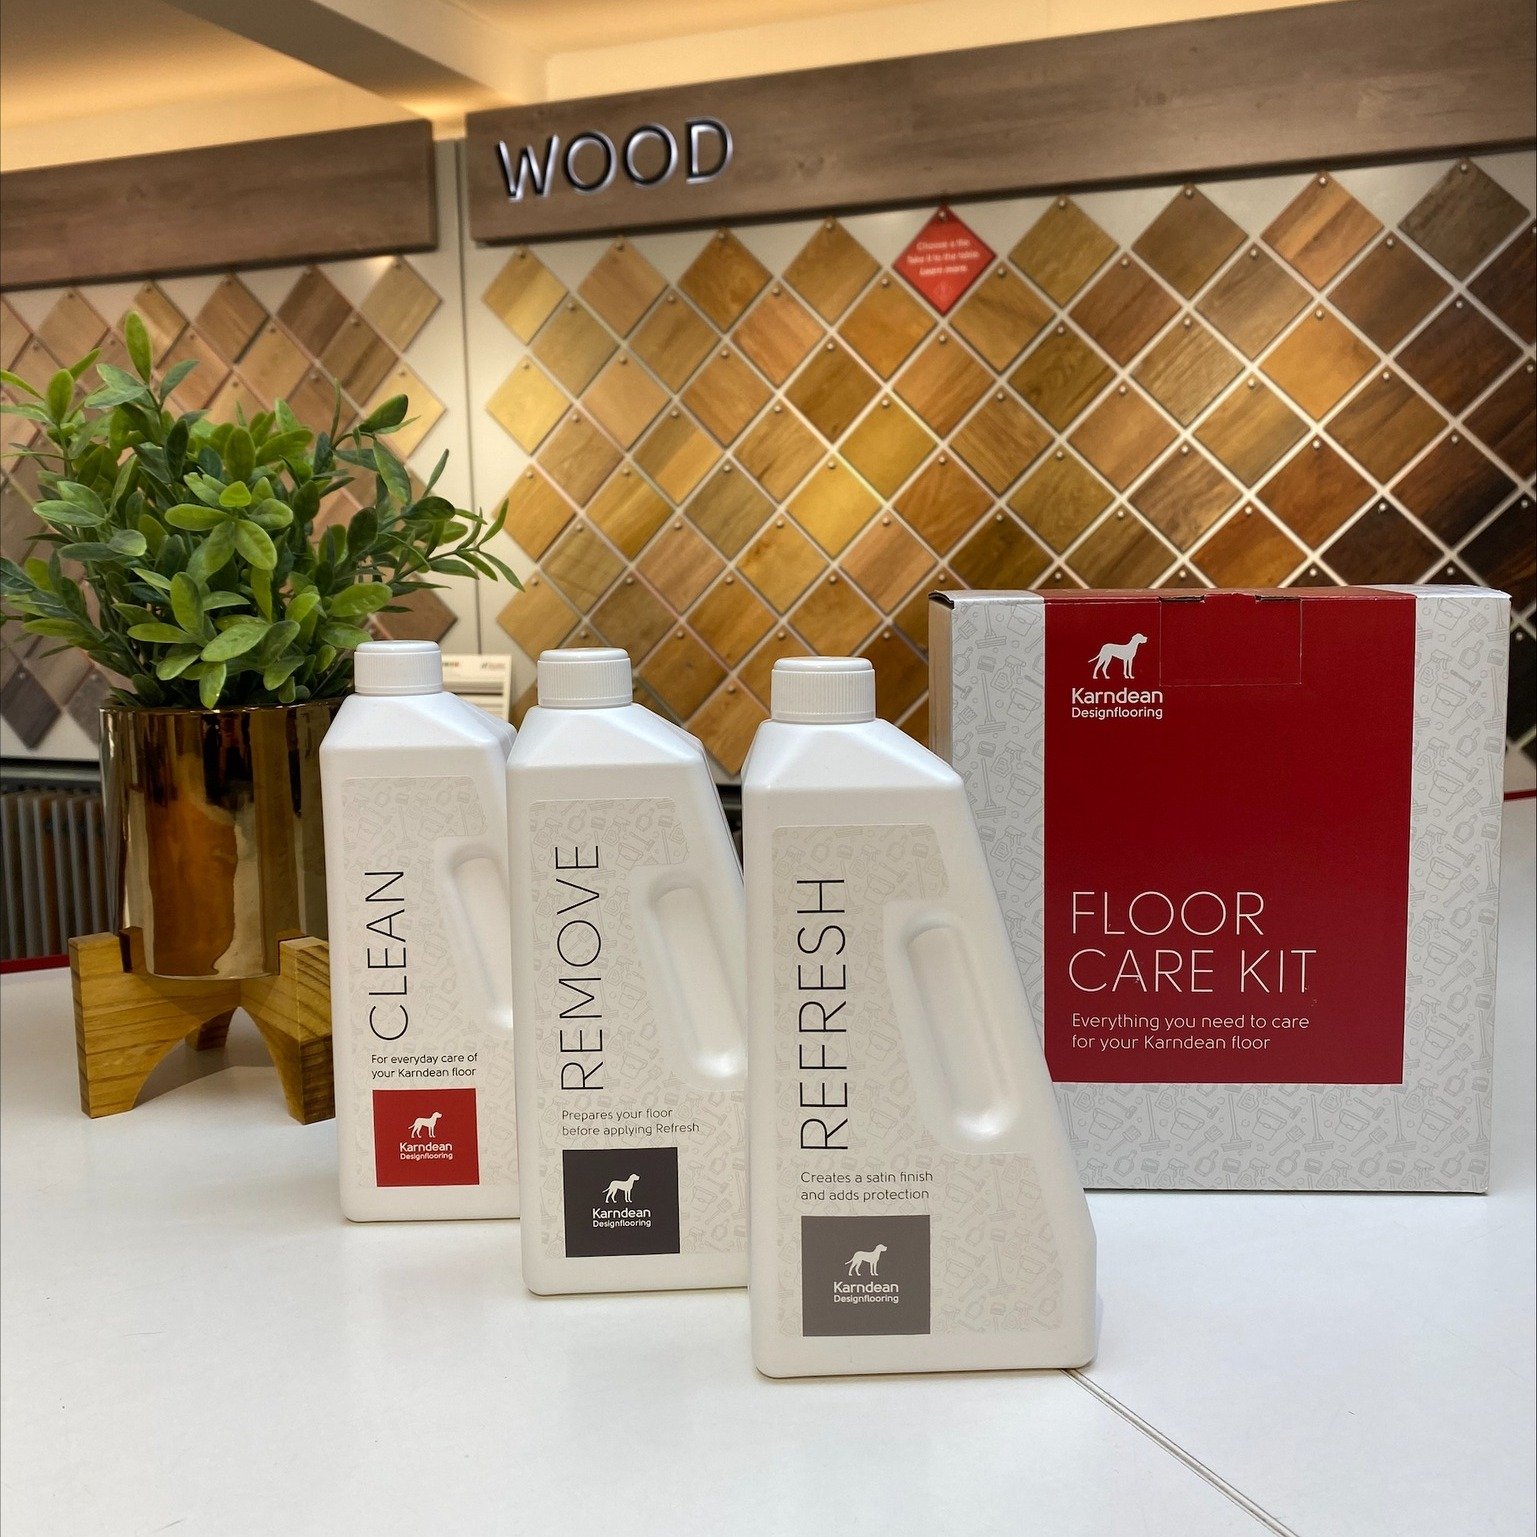 ✨ New Branding on all Karndean Cleaning Products but with the same fantastic benefits of keeping your floor in great condition! 

Always available to purchase from our Showroom! 
.
.
.
 #inspireshowroom #designflooring #sbffloors #homeinspo #shaw #si